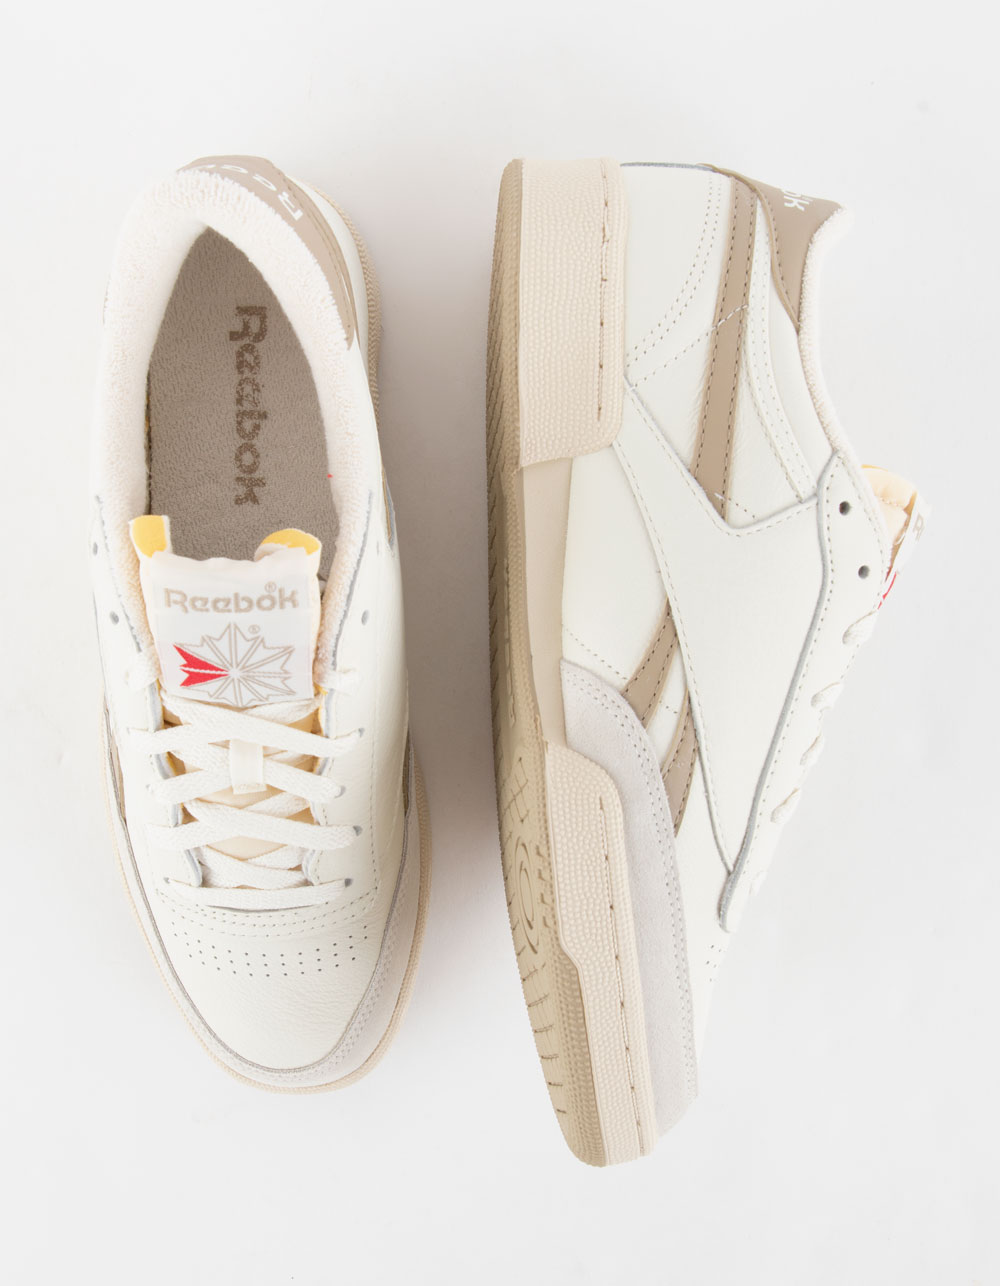 Reebok Club C revenge sneakers in off-white with beige detail